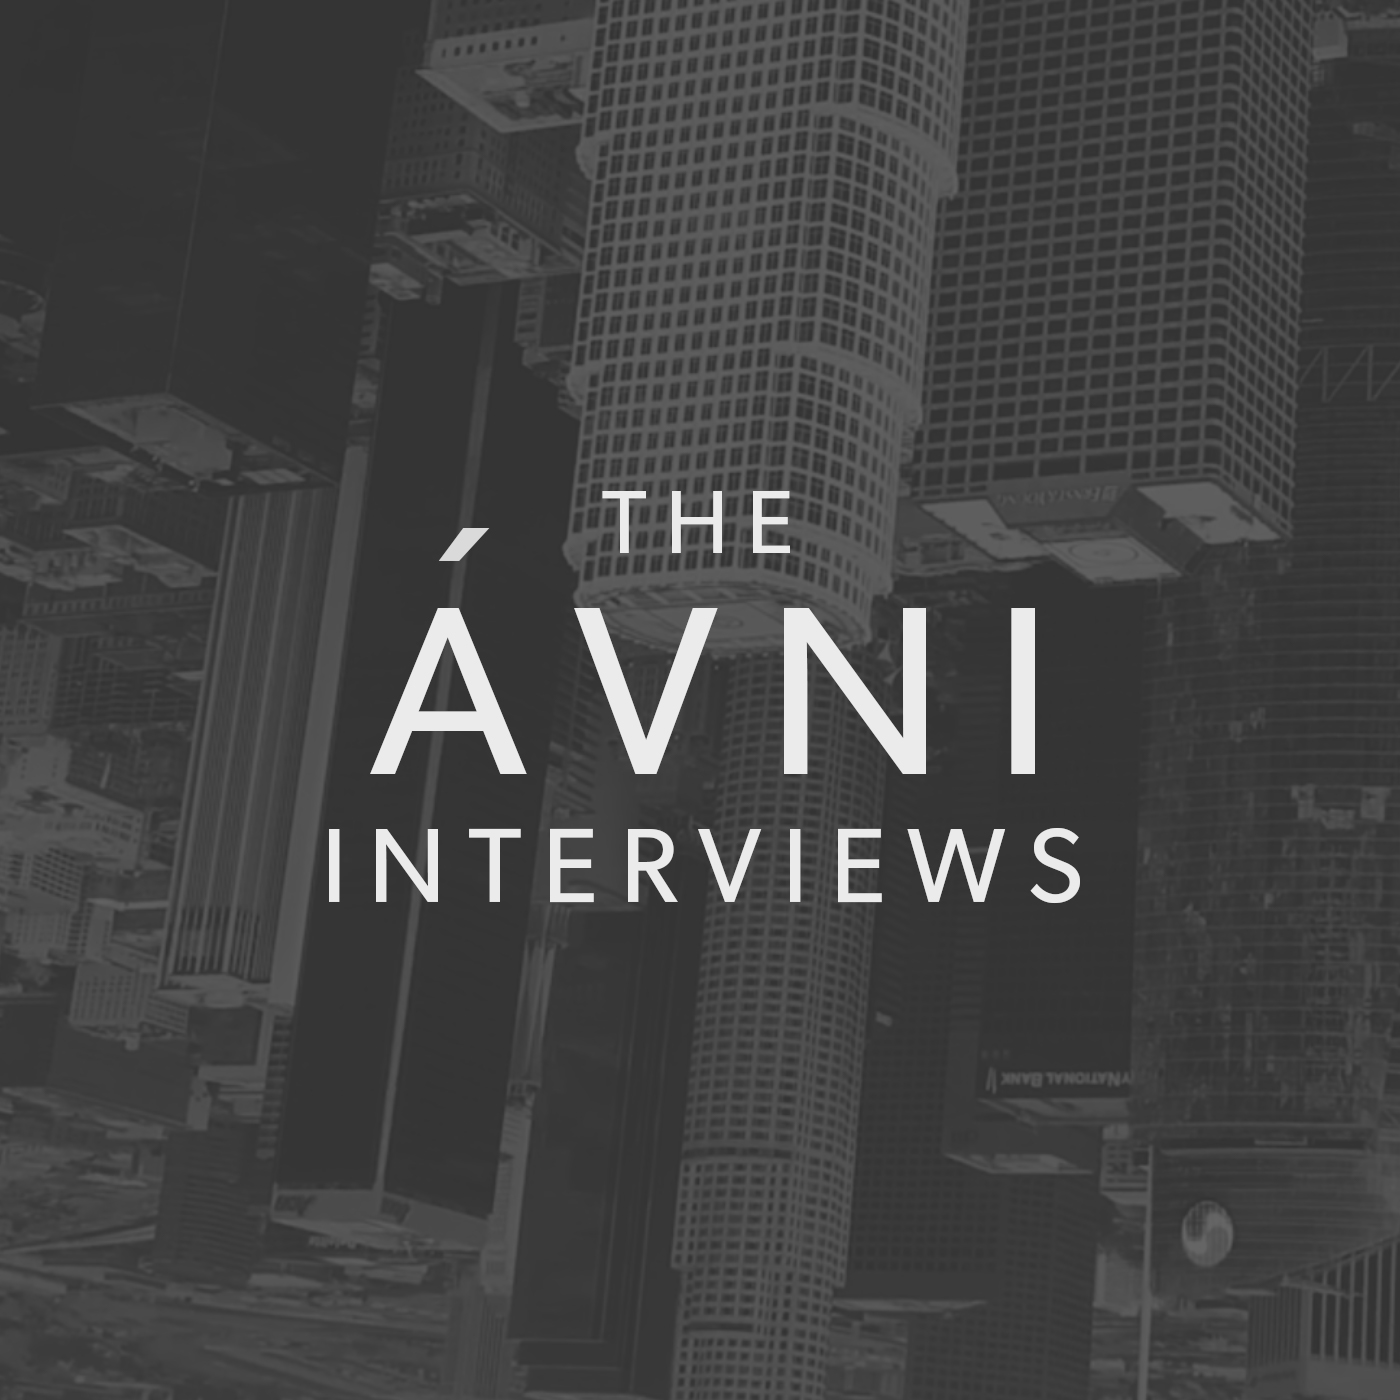 Paul Rodriguez on Skill vs Talent | The AVNI Interviews 0024 with Mikey Taylor & Eric Bork